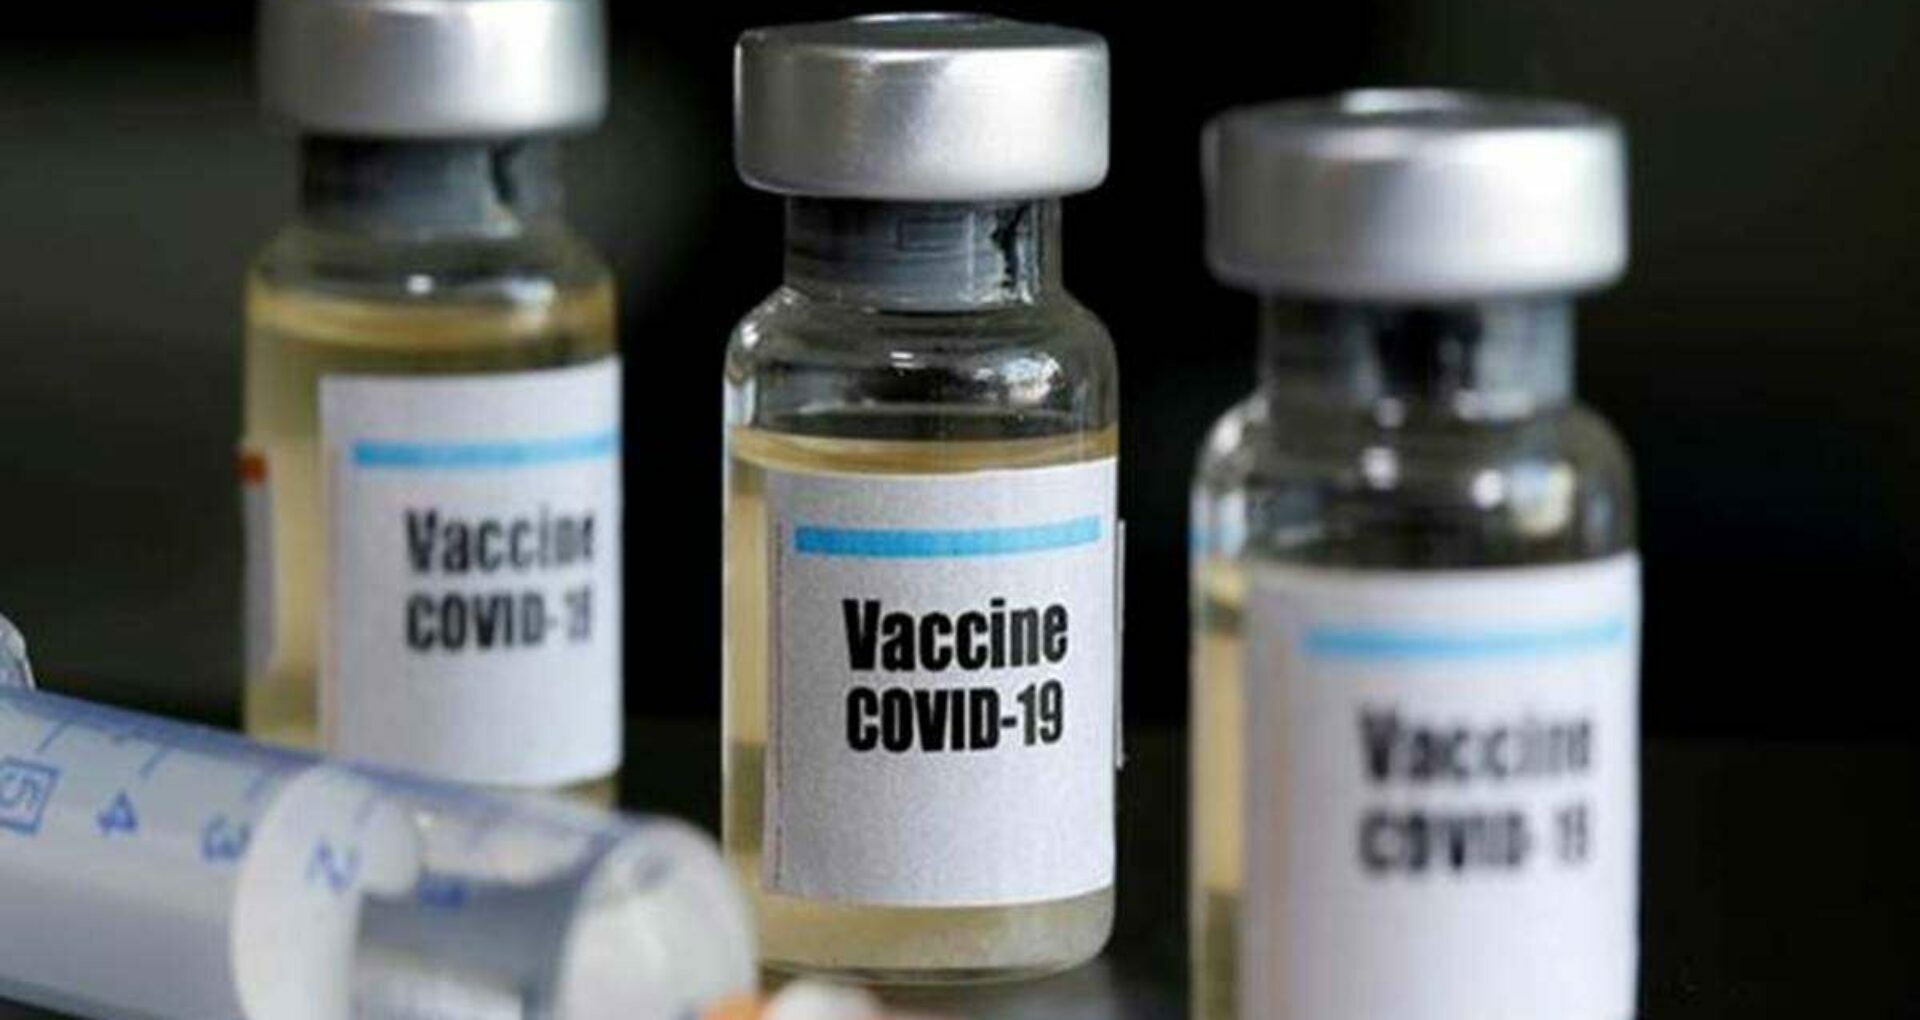 A Second Vaccine Against COVID-19 Approved by China